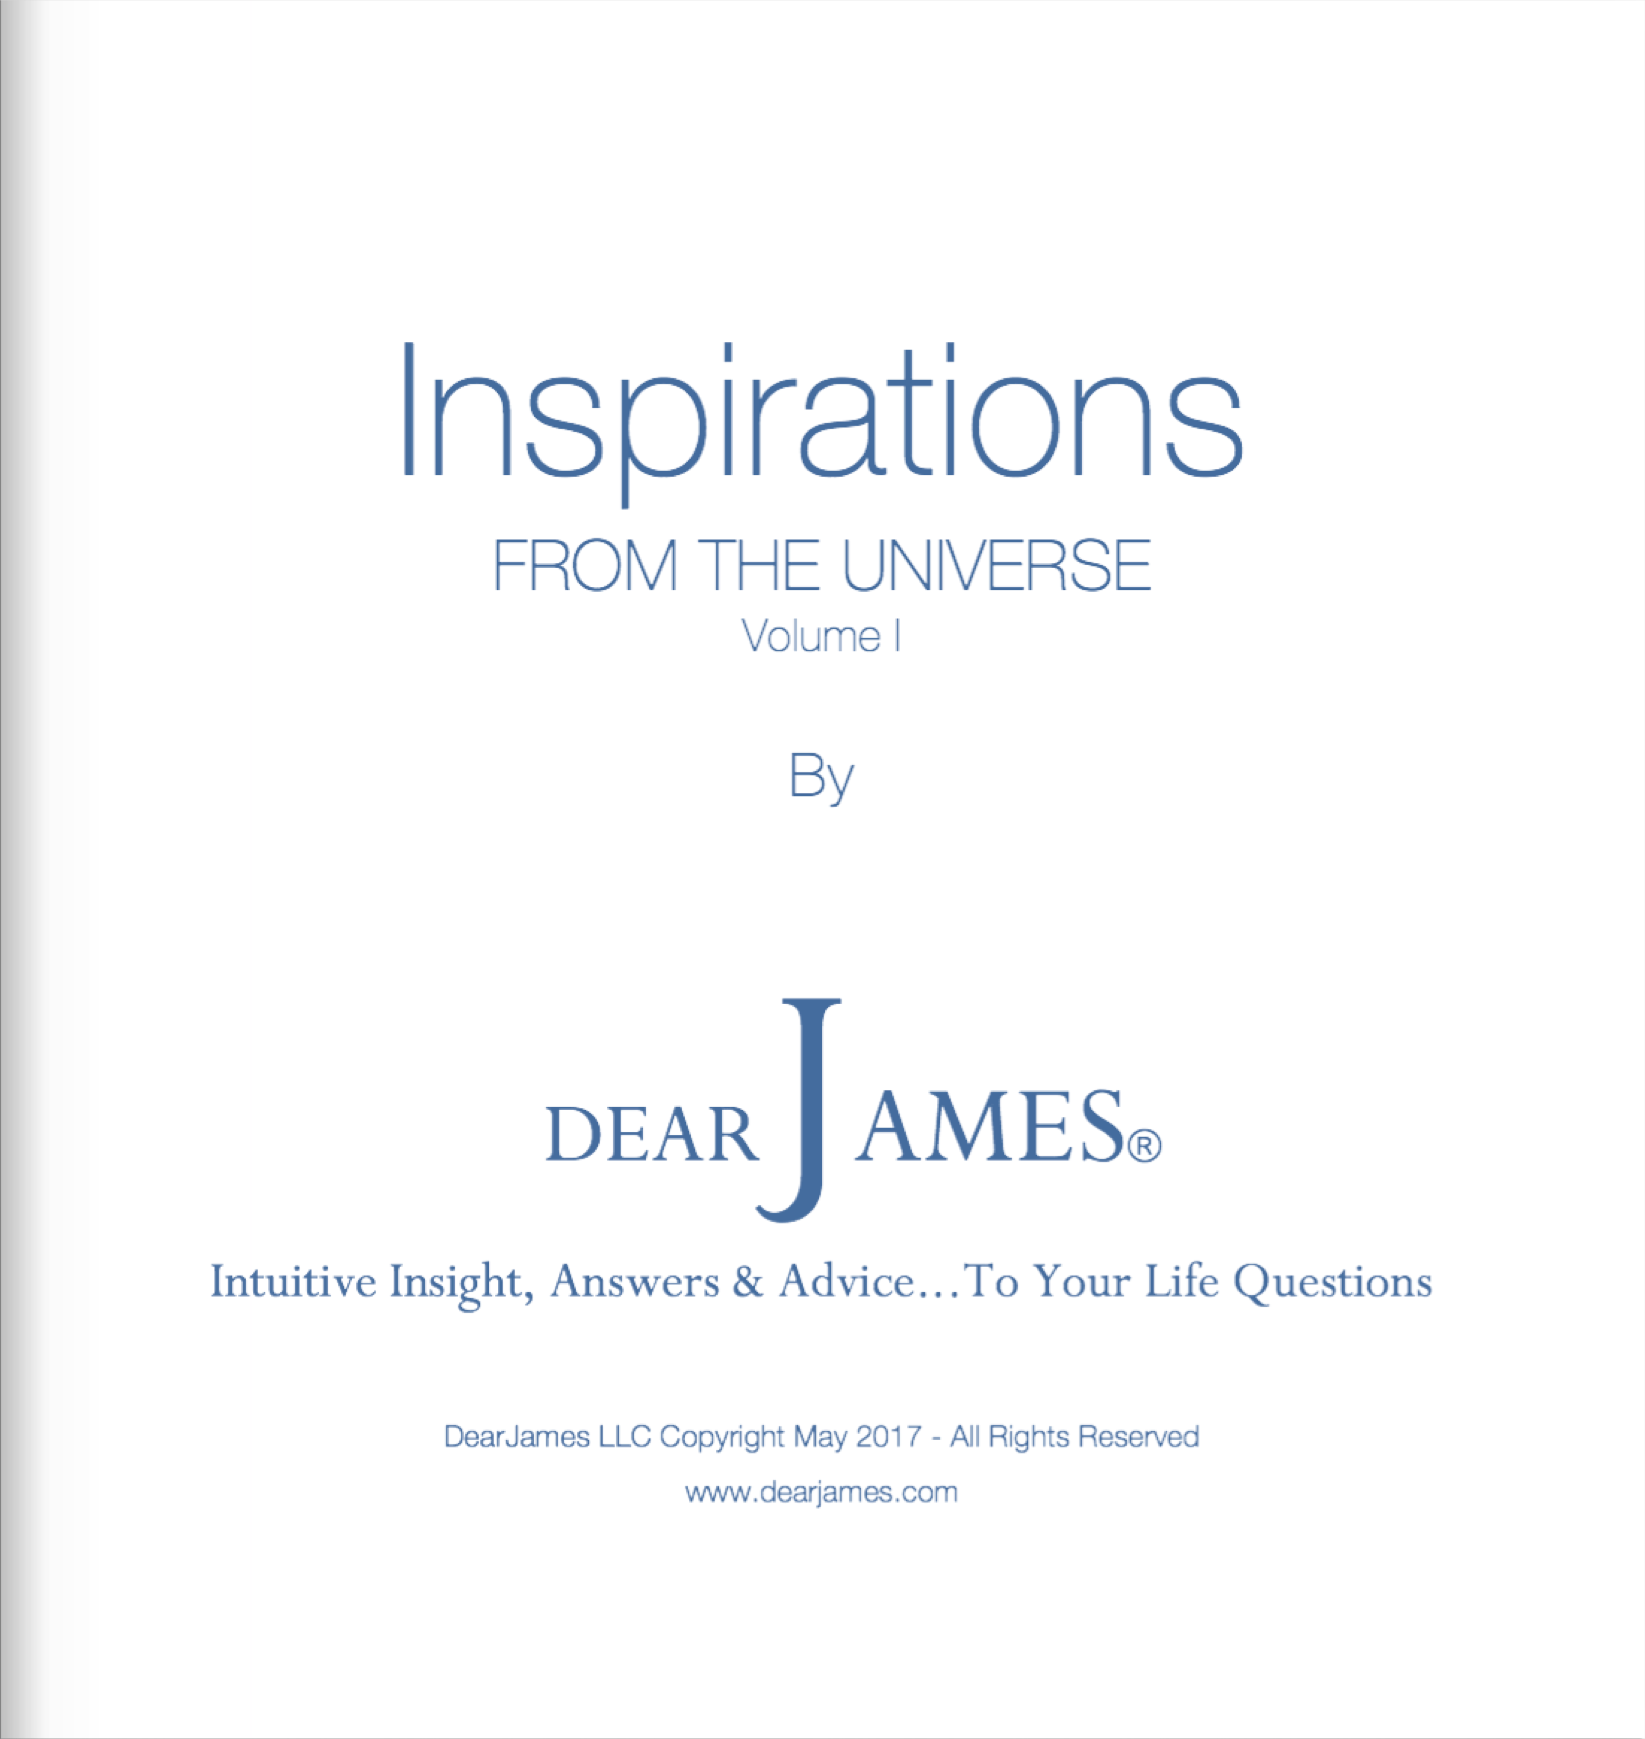 Title Page - Inspirations from the Universe - Volume I